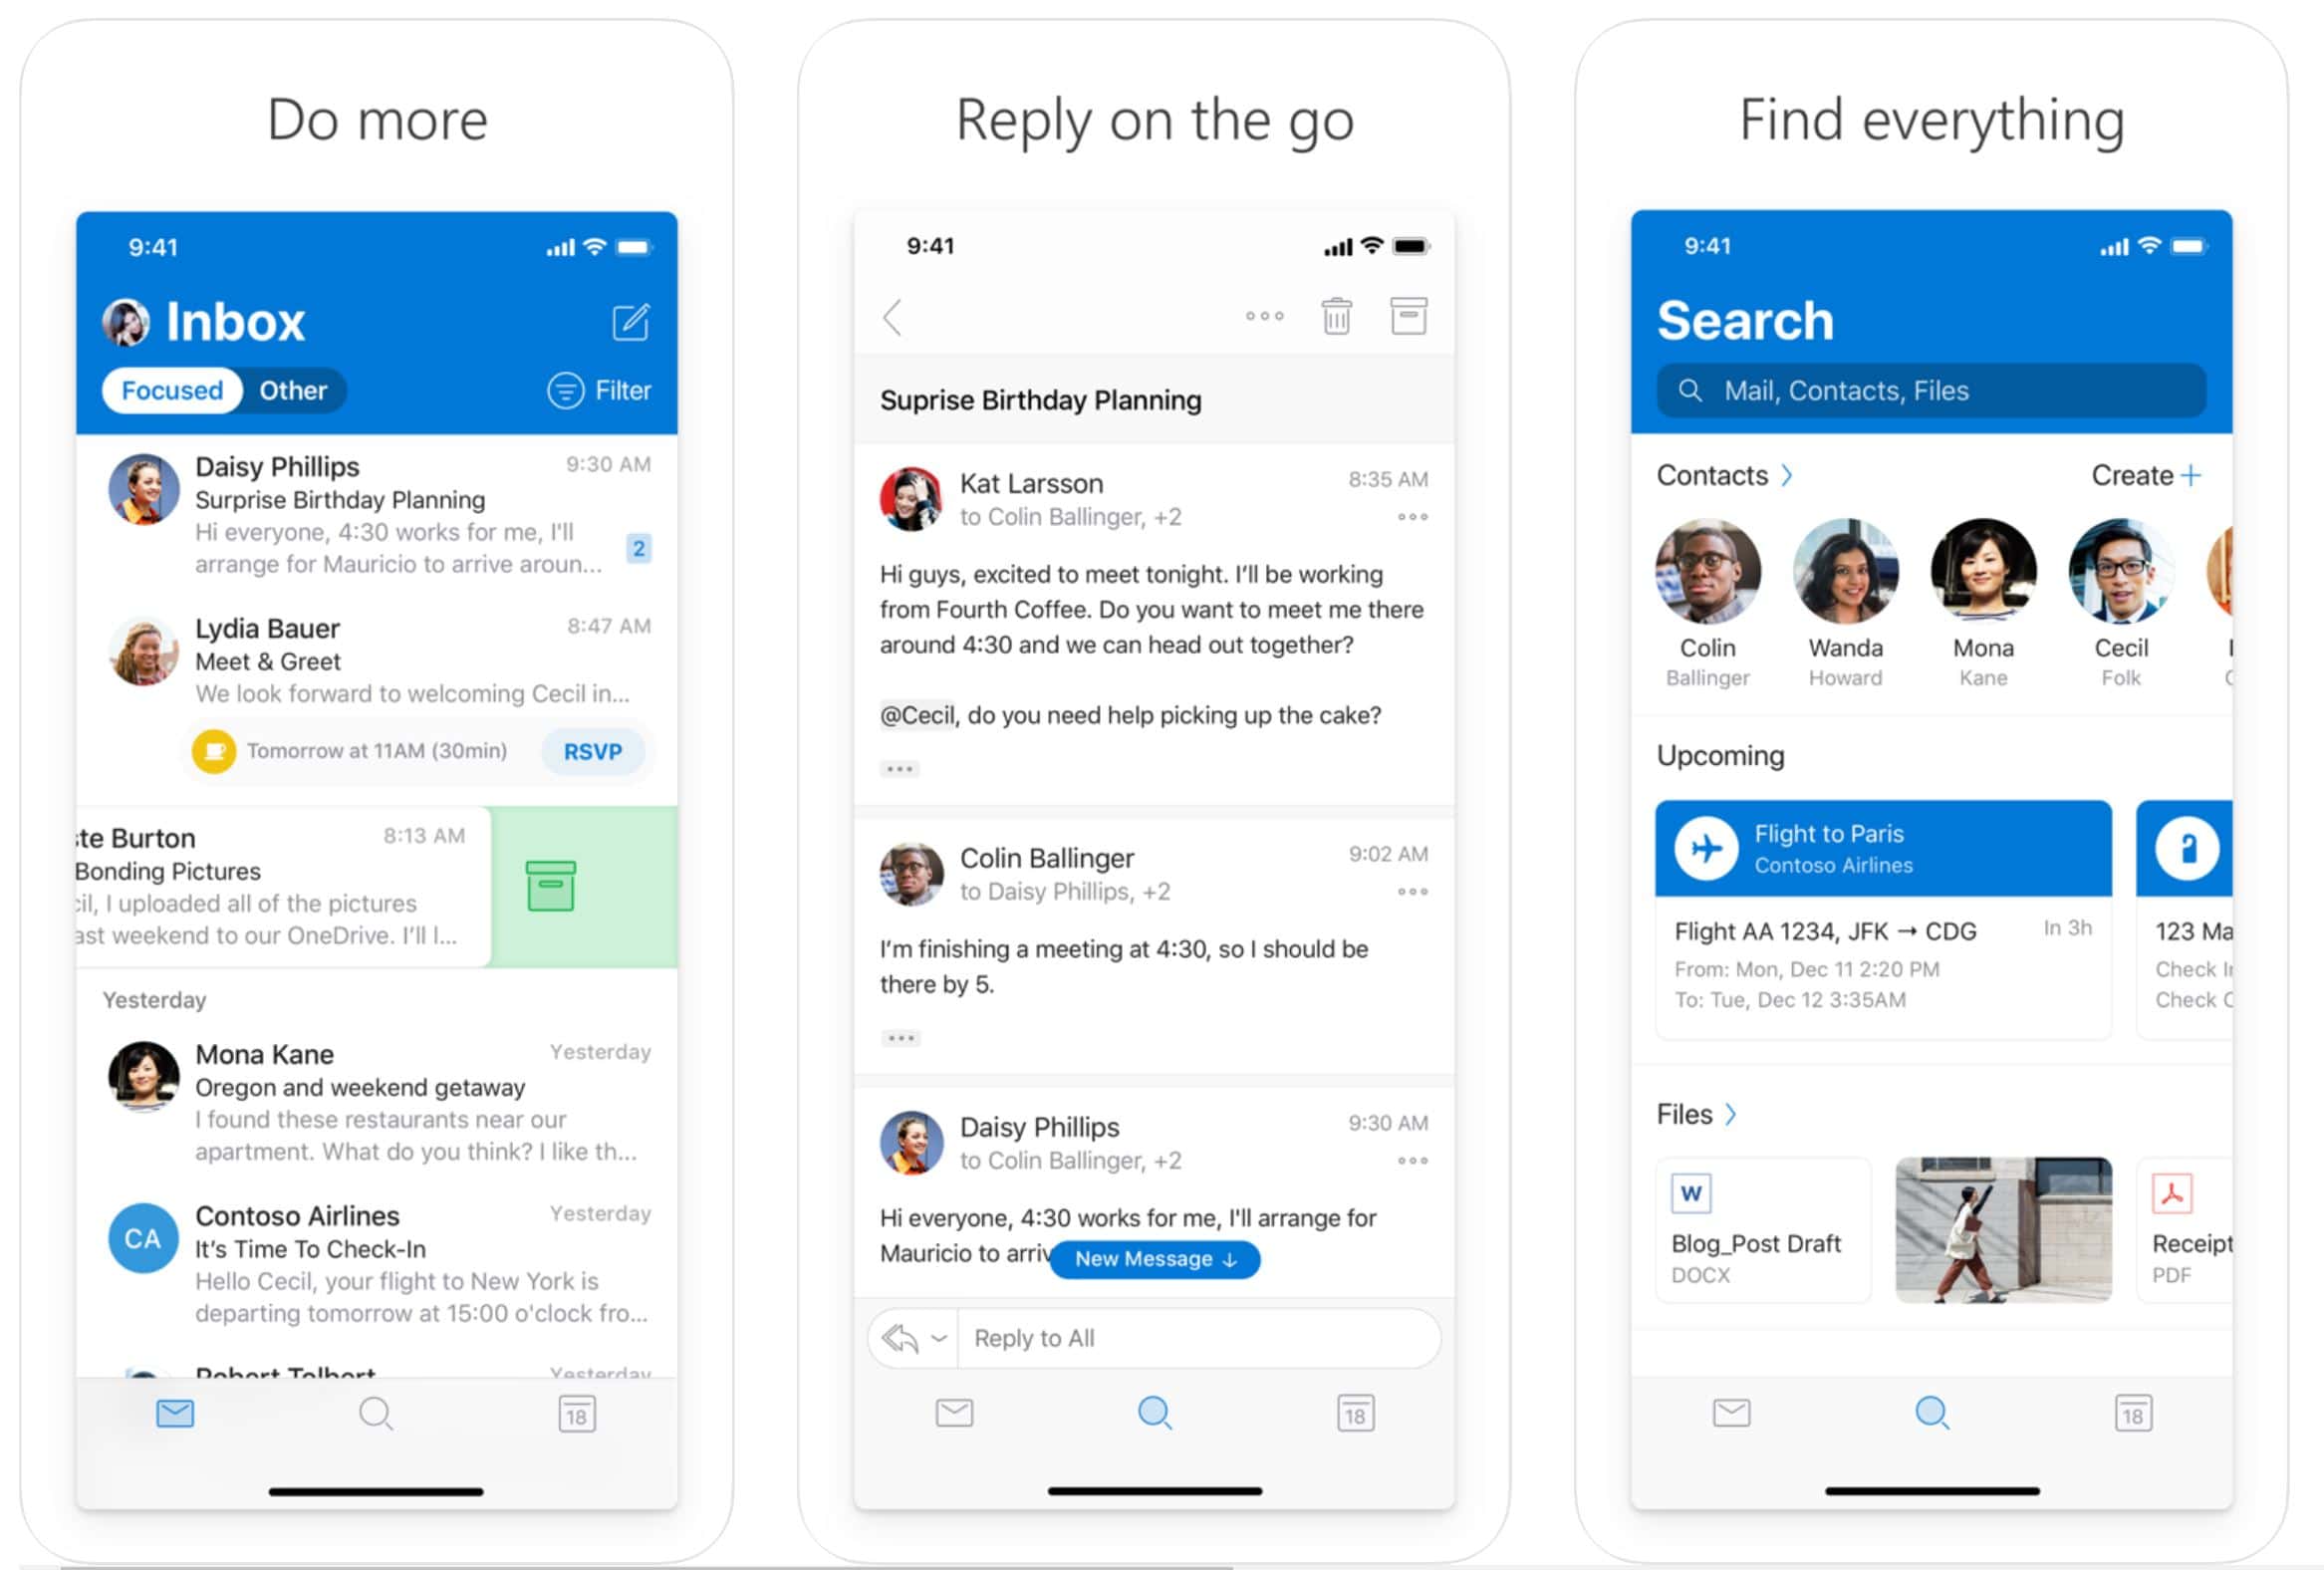 Microsoft announces availability of Dictation feature for Outlook on iPhone and iPad